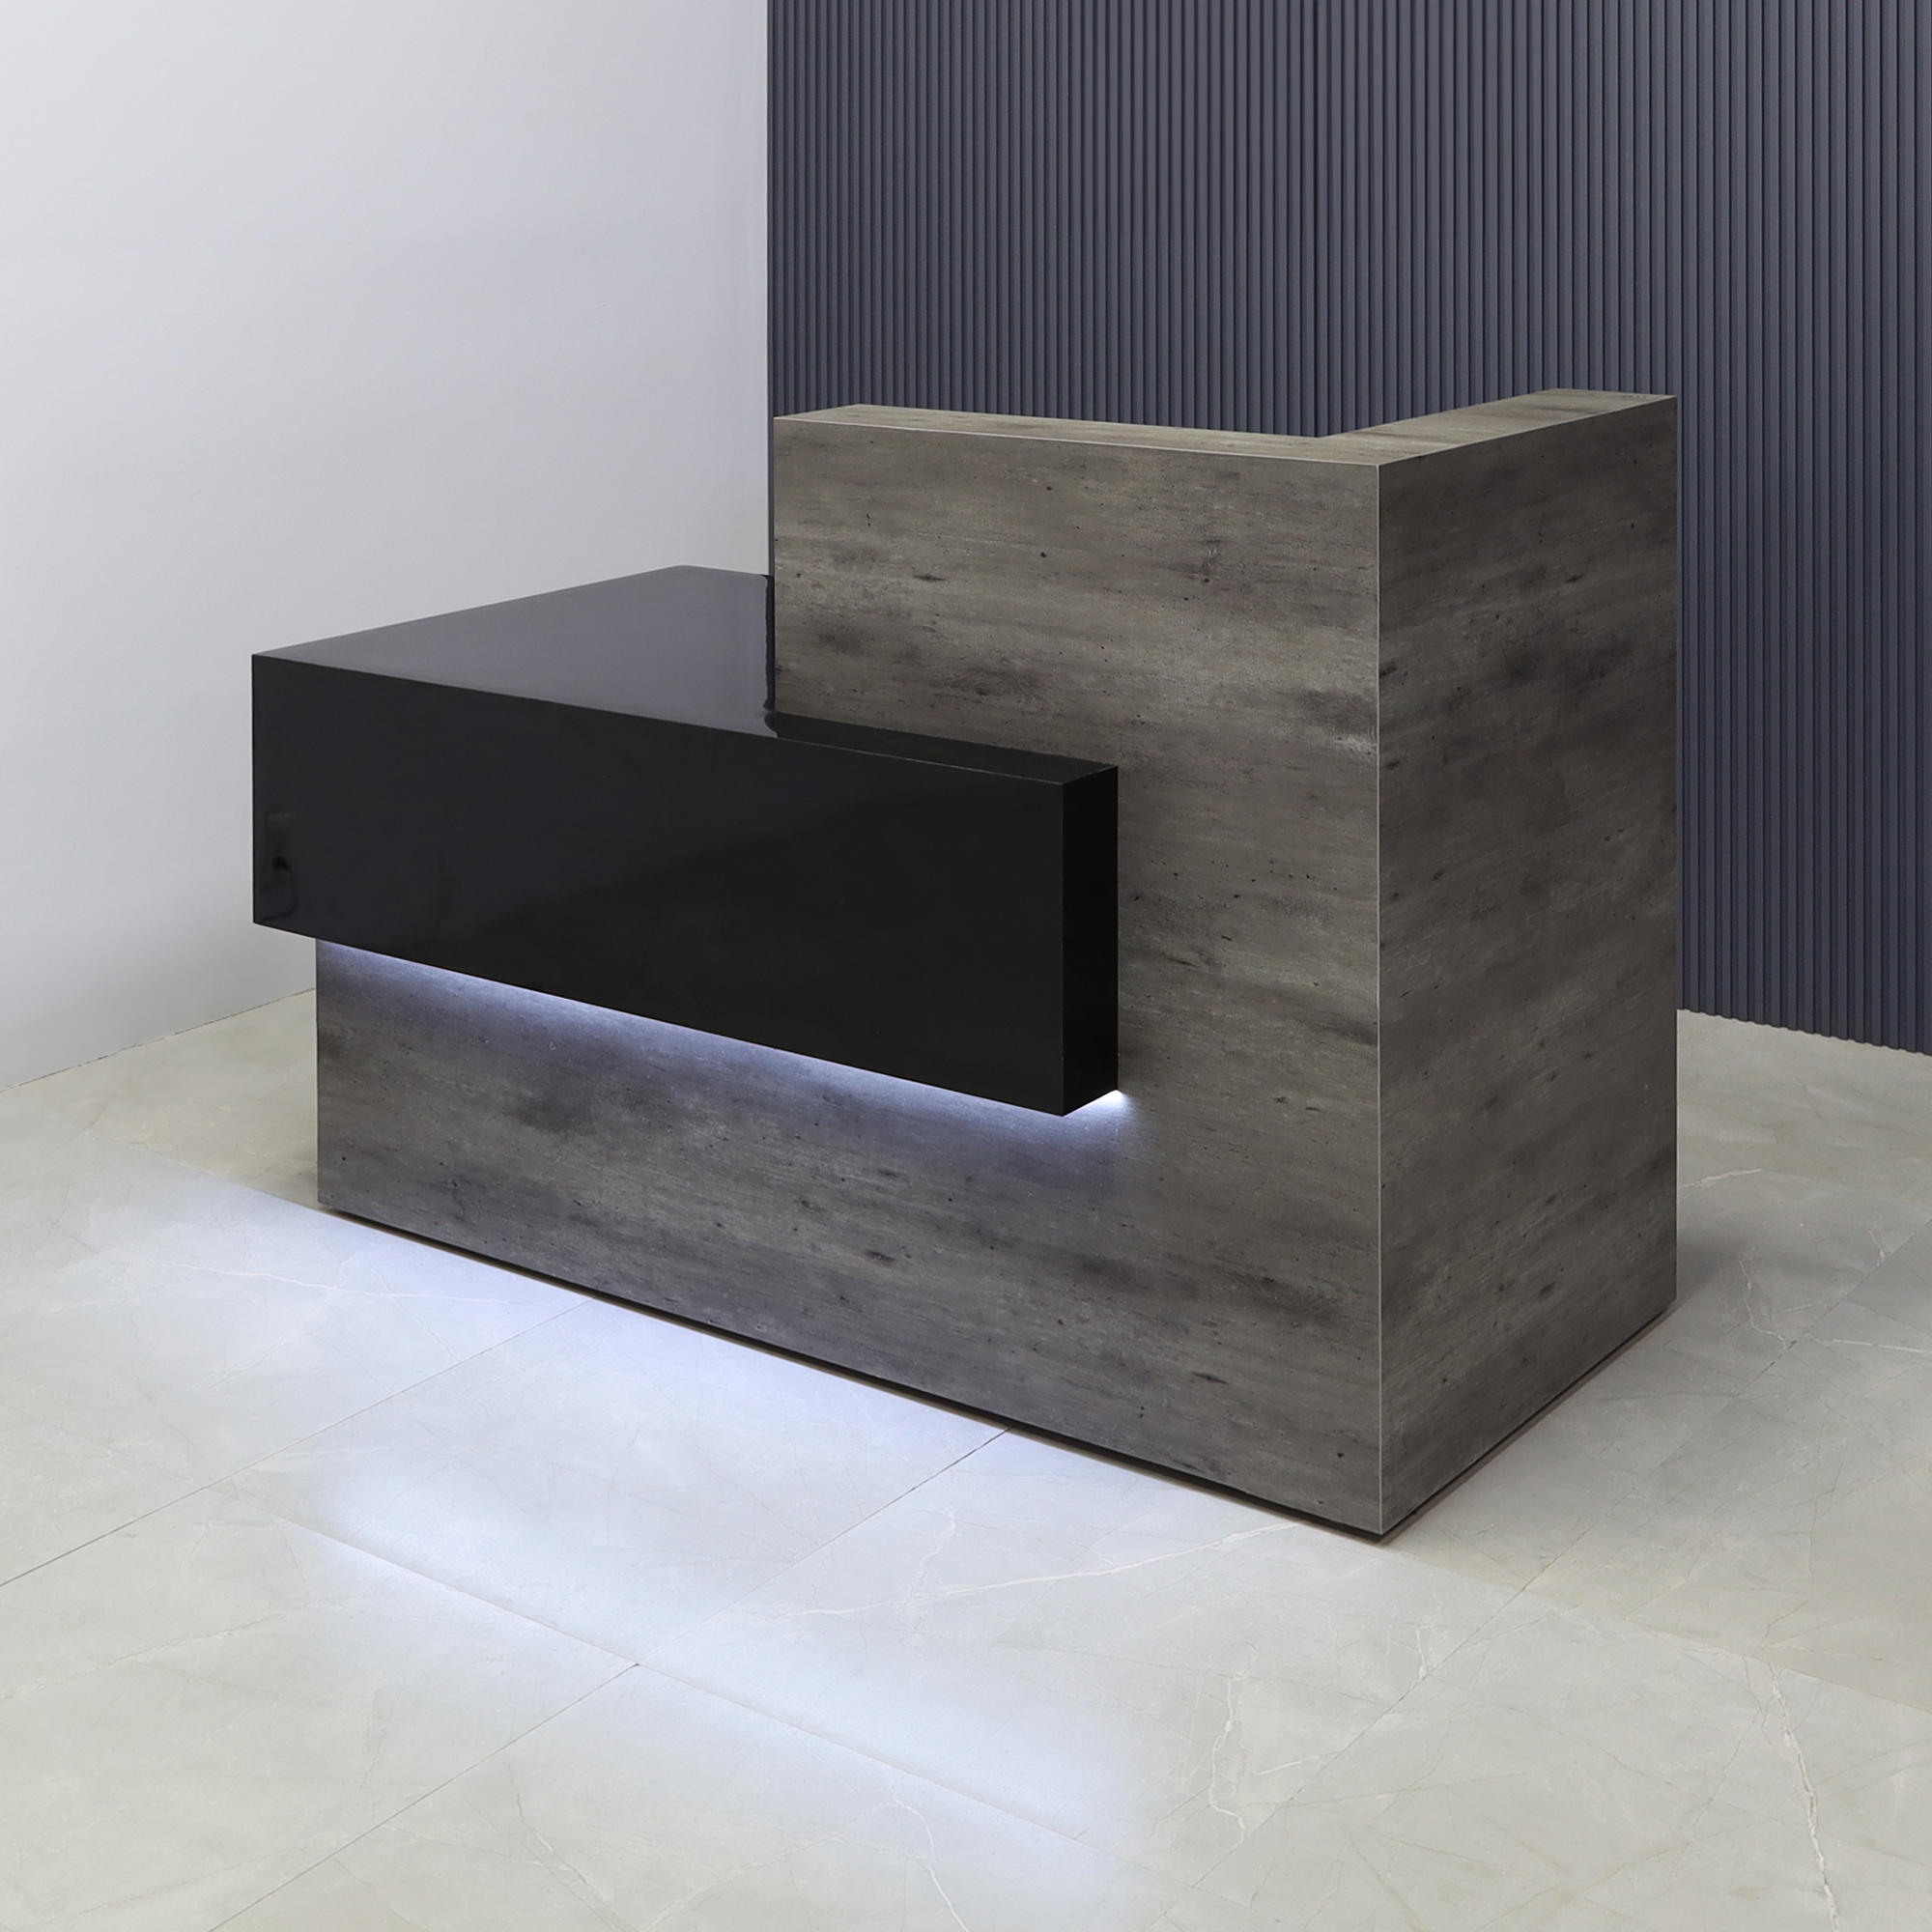 Atlanta Custom Reception Desk in concrete laminate countertop & base, black gloss laminate front accent and workspace, with white LED shown here.